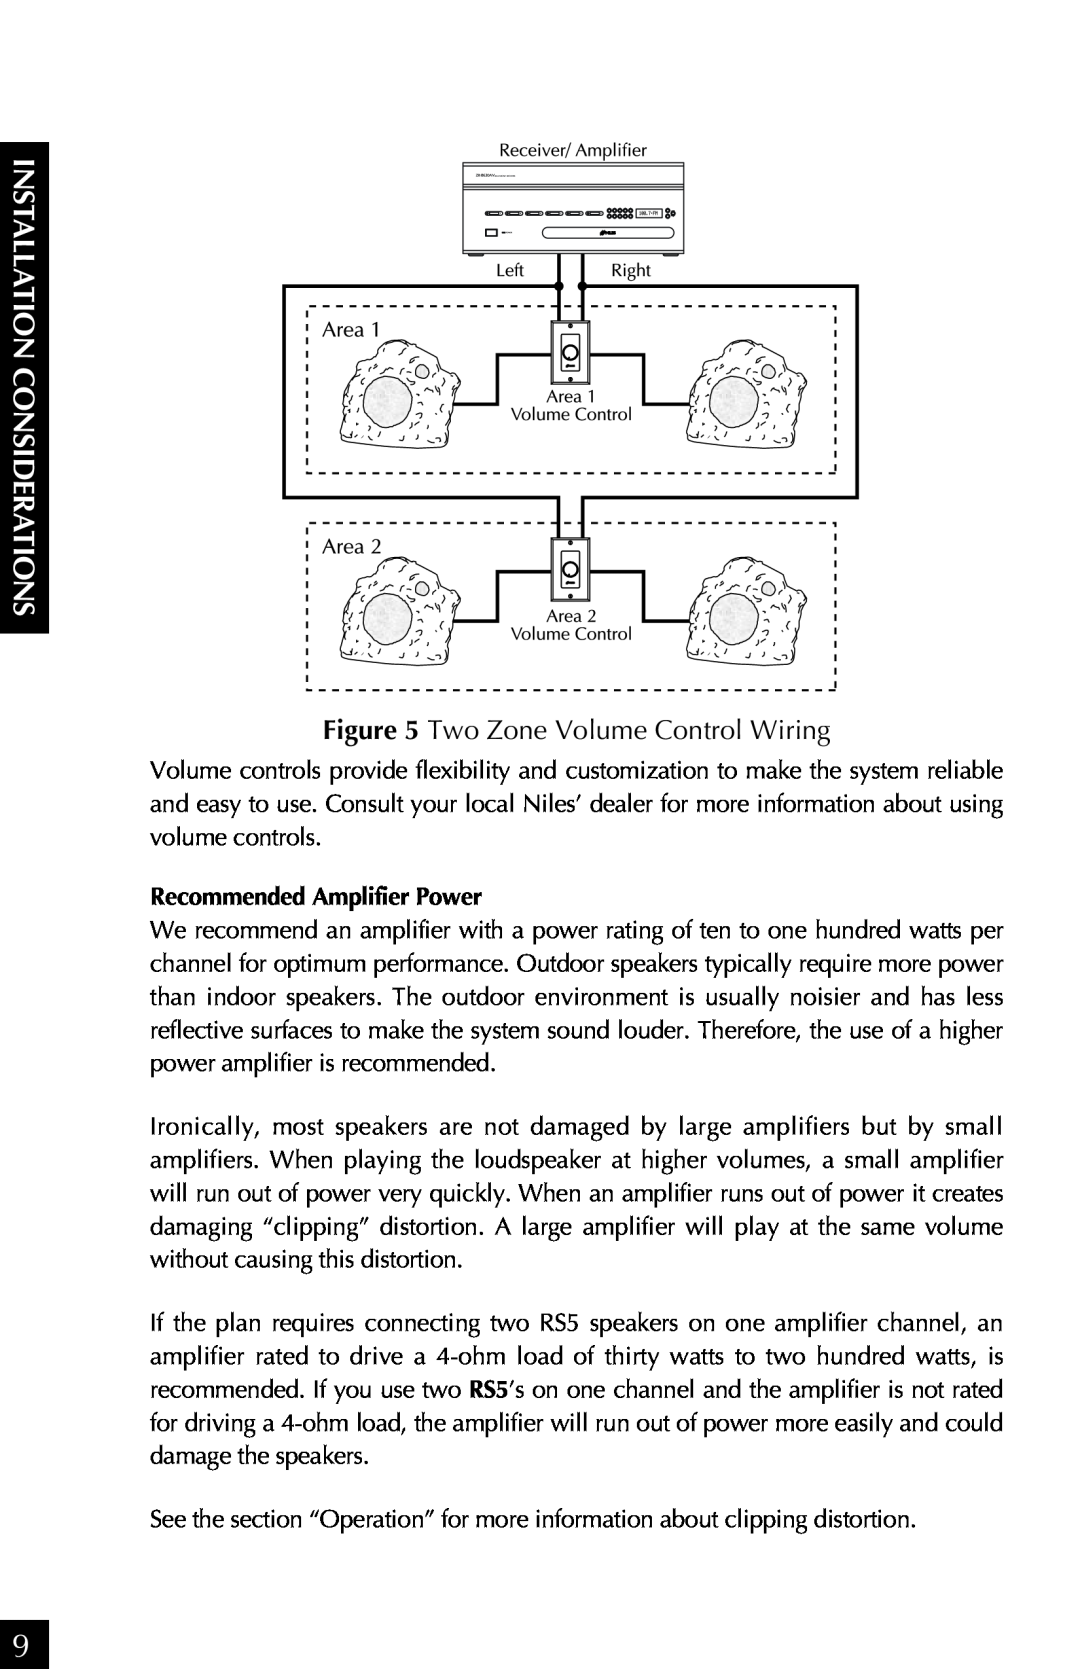 Niles Audio RS 5s manual Installation Considerations, Two Zone Volume Control Wiring, Recommended Amplifier Power 